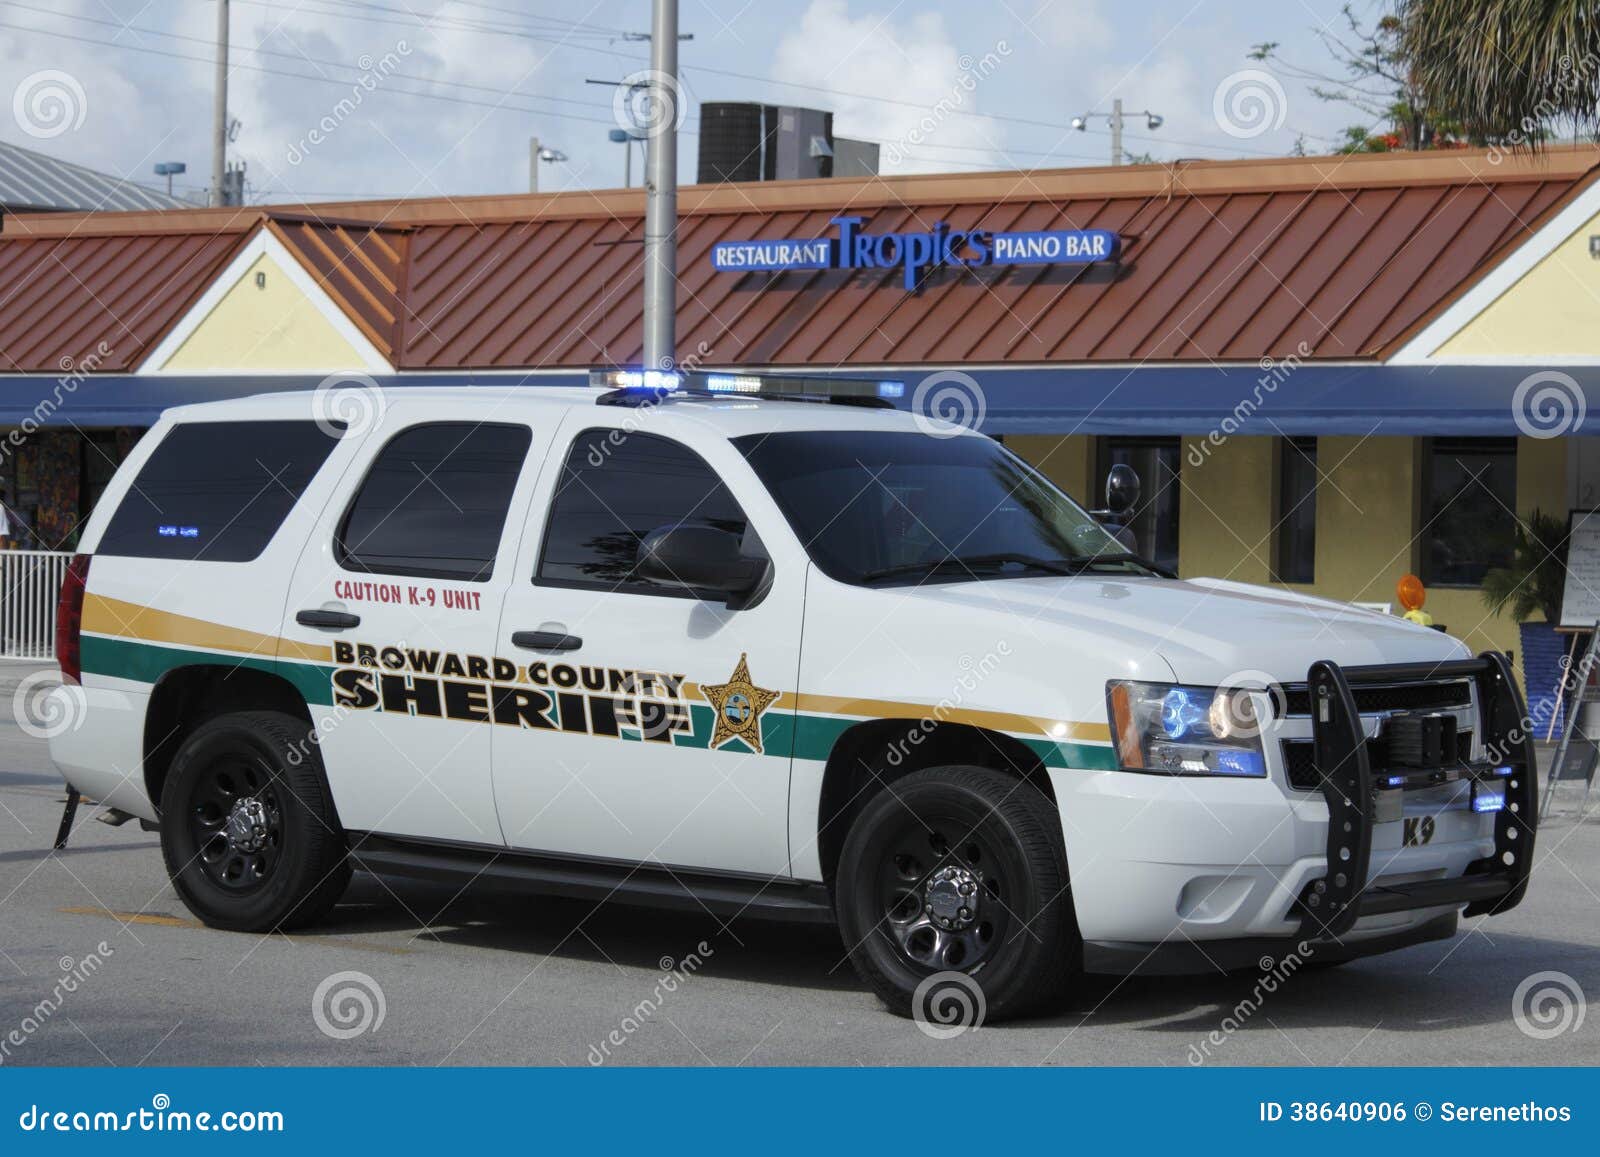 K-9 Unit Broward County Sheriff Editorial Photo - Image of manors,  outdoors: 38640906